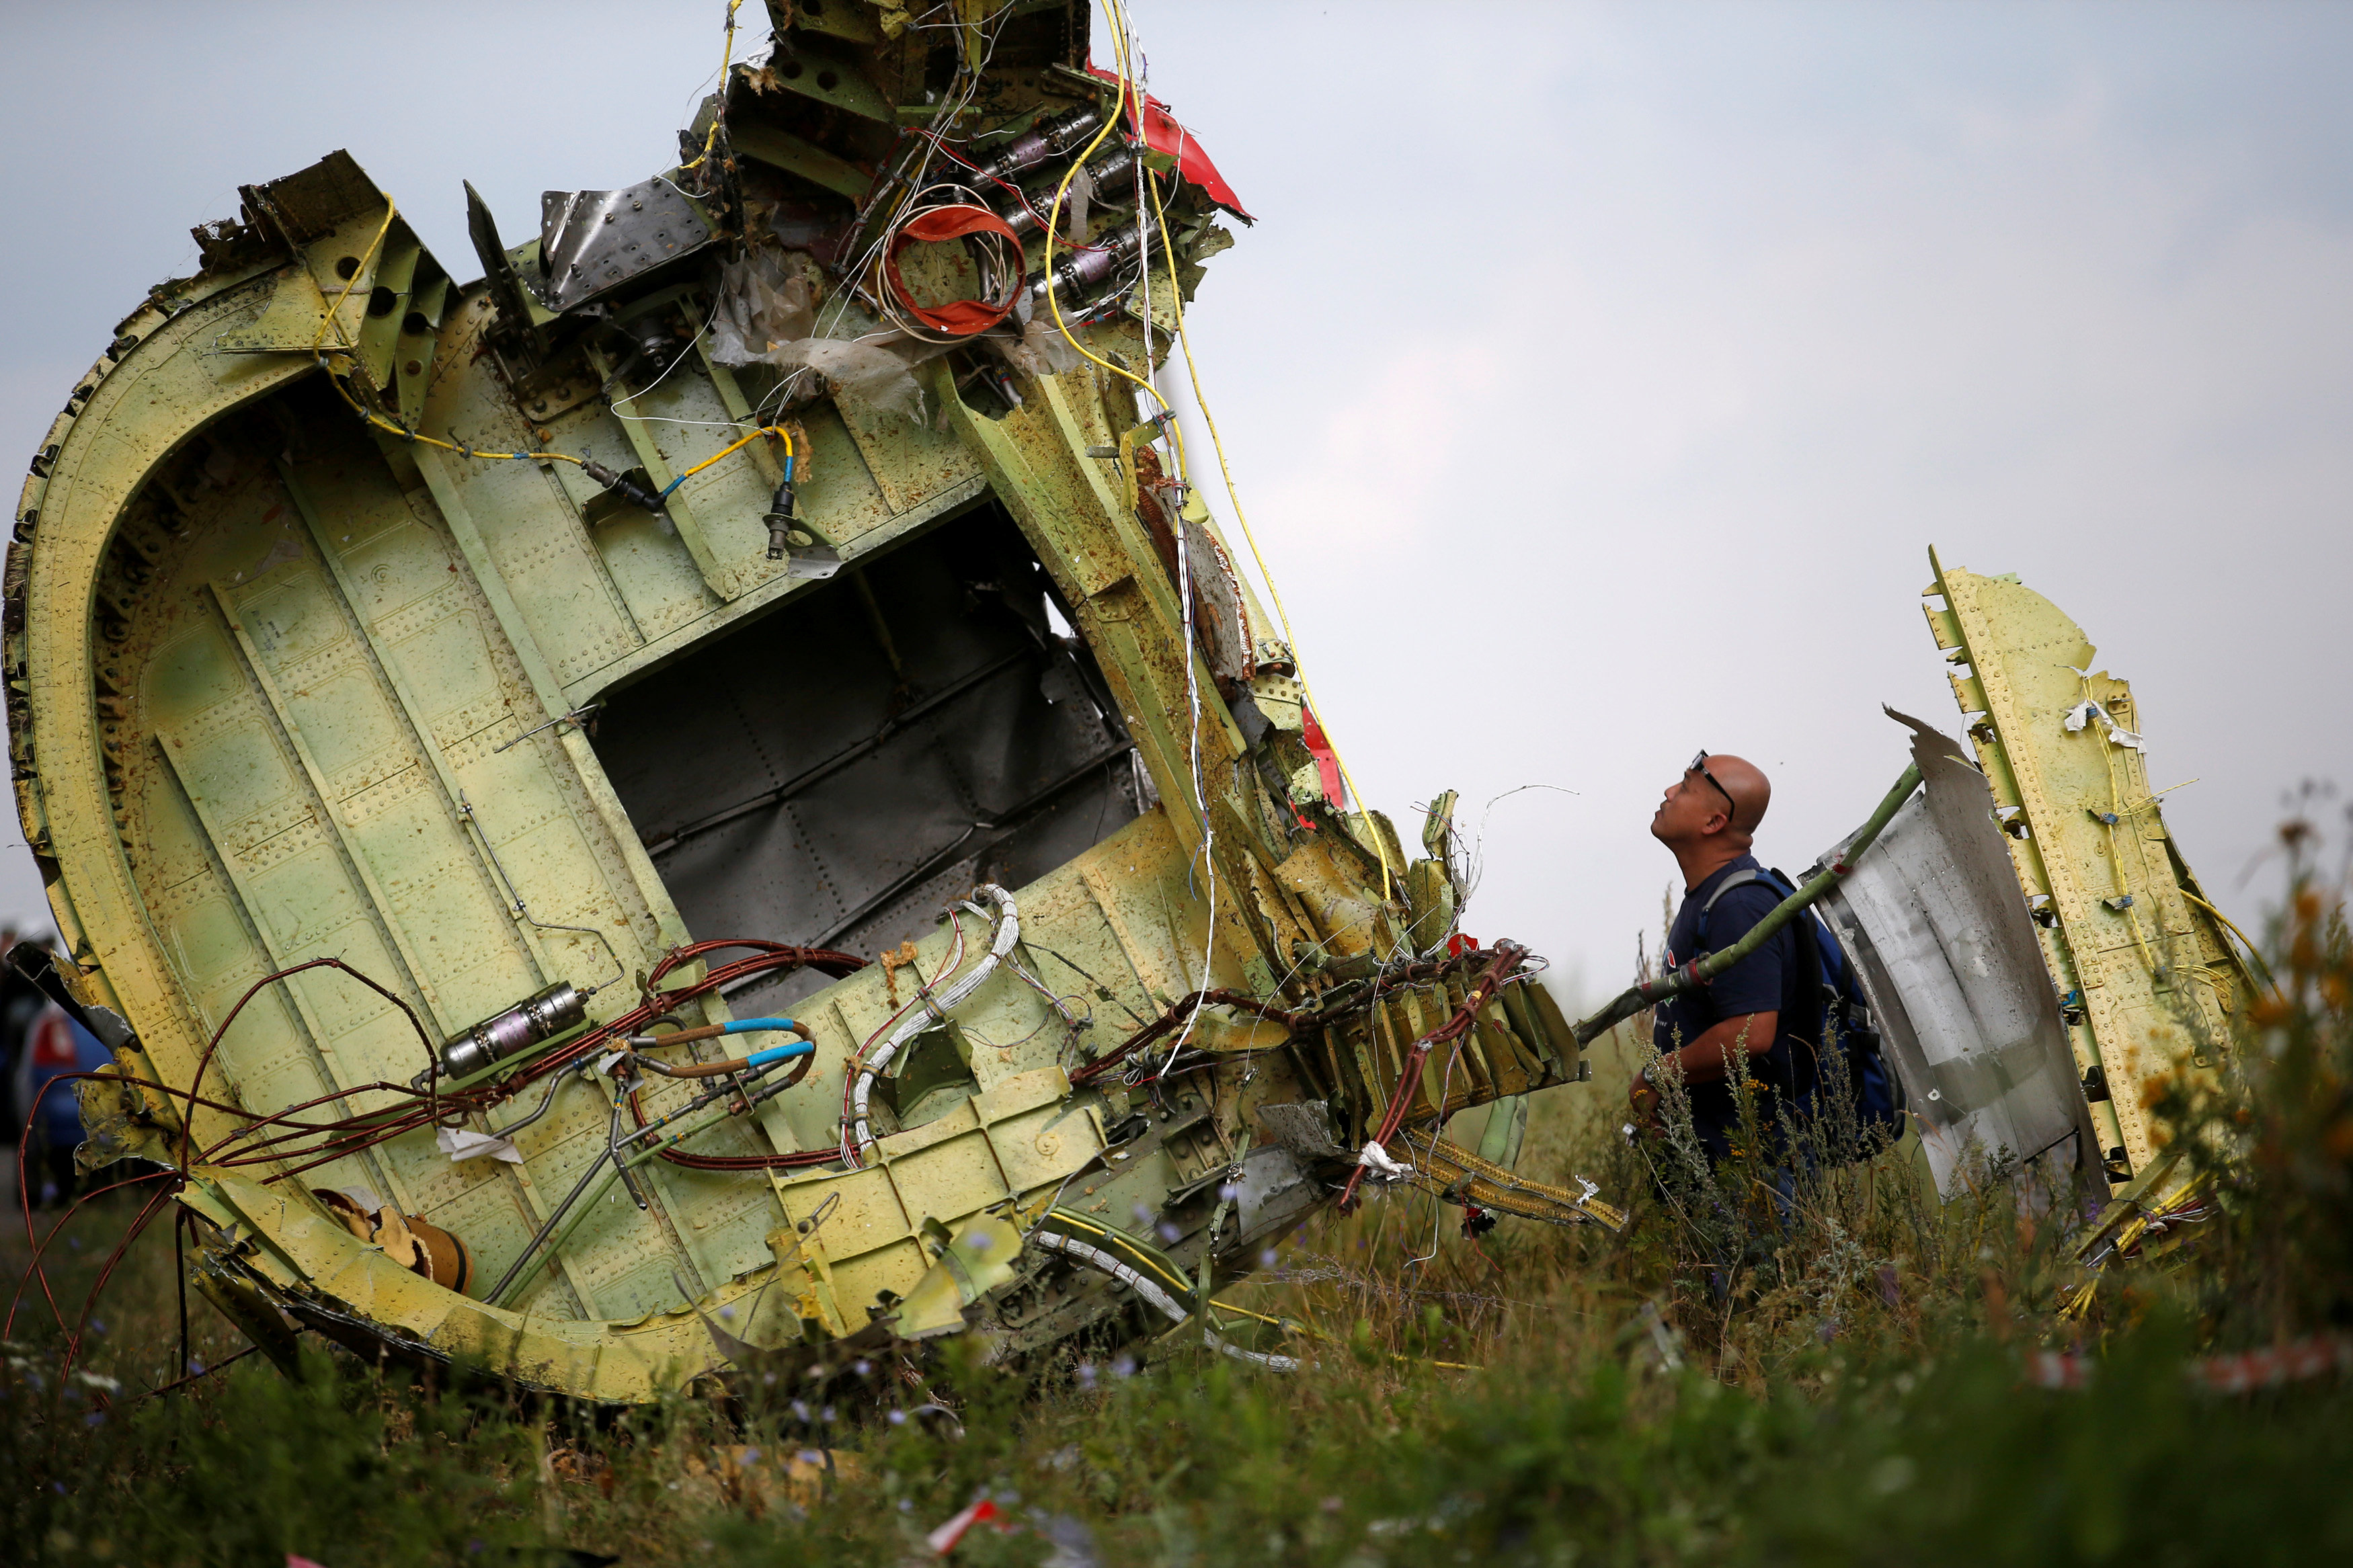 A Malaysian air crash investigator inspects the crash site of Malaysia Airlines Flight MH17, near the village of Hrabove (Grabovo) in Donetsk region, Ukraine, July 22, 2014. REUTERS/Maxim Zmeyev/File Photon